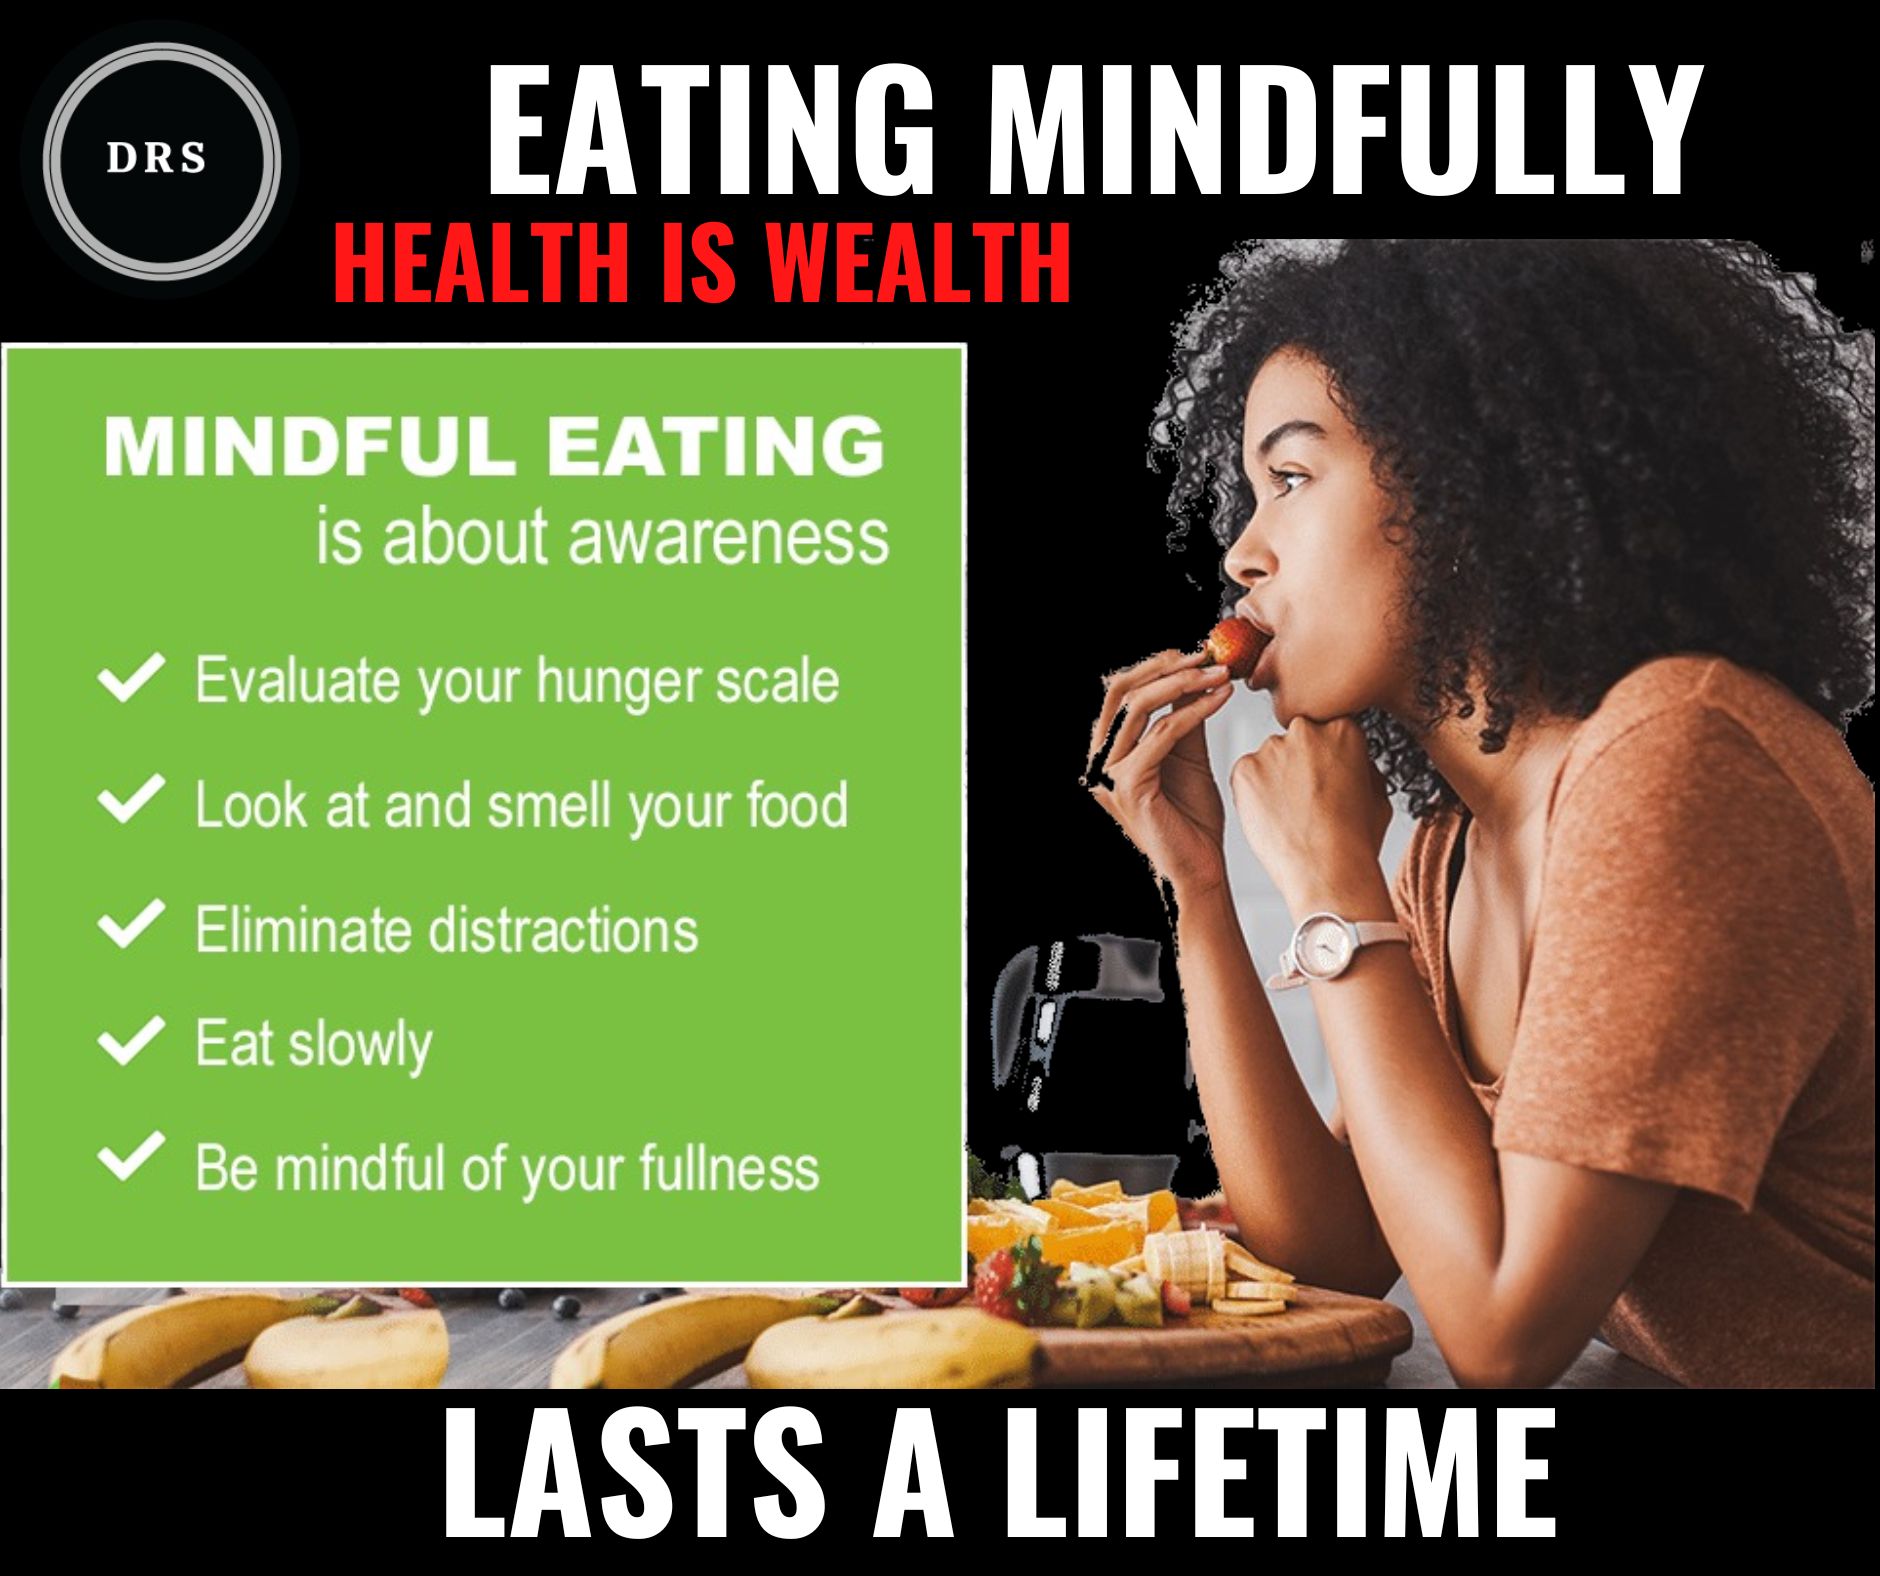 A Lifetime of Eating Mindfully